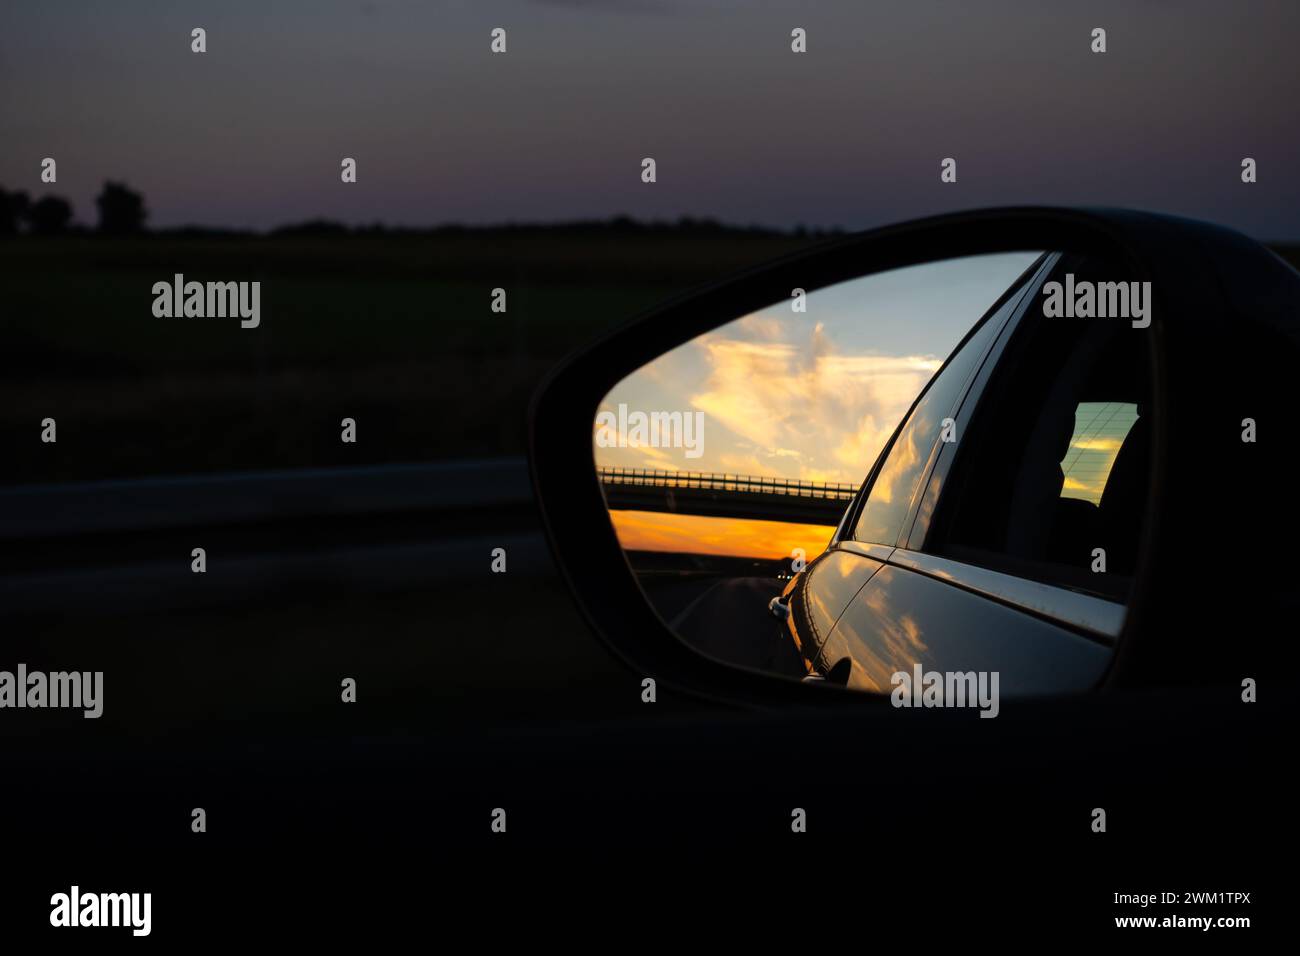 View in the outside rearview mirror of a car. View from inside of the car. Evening car ride on the highway. Stock Photo